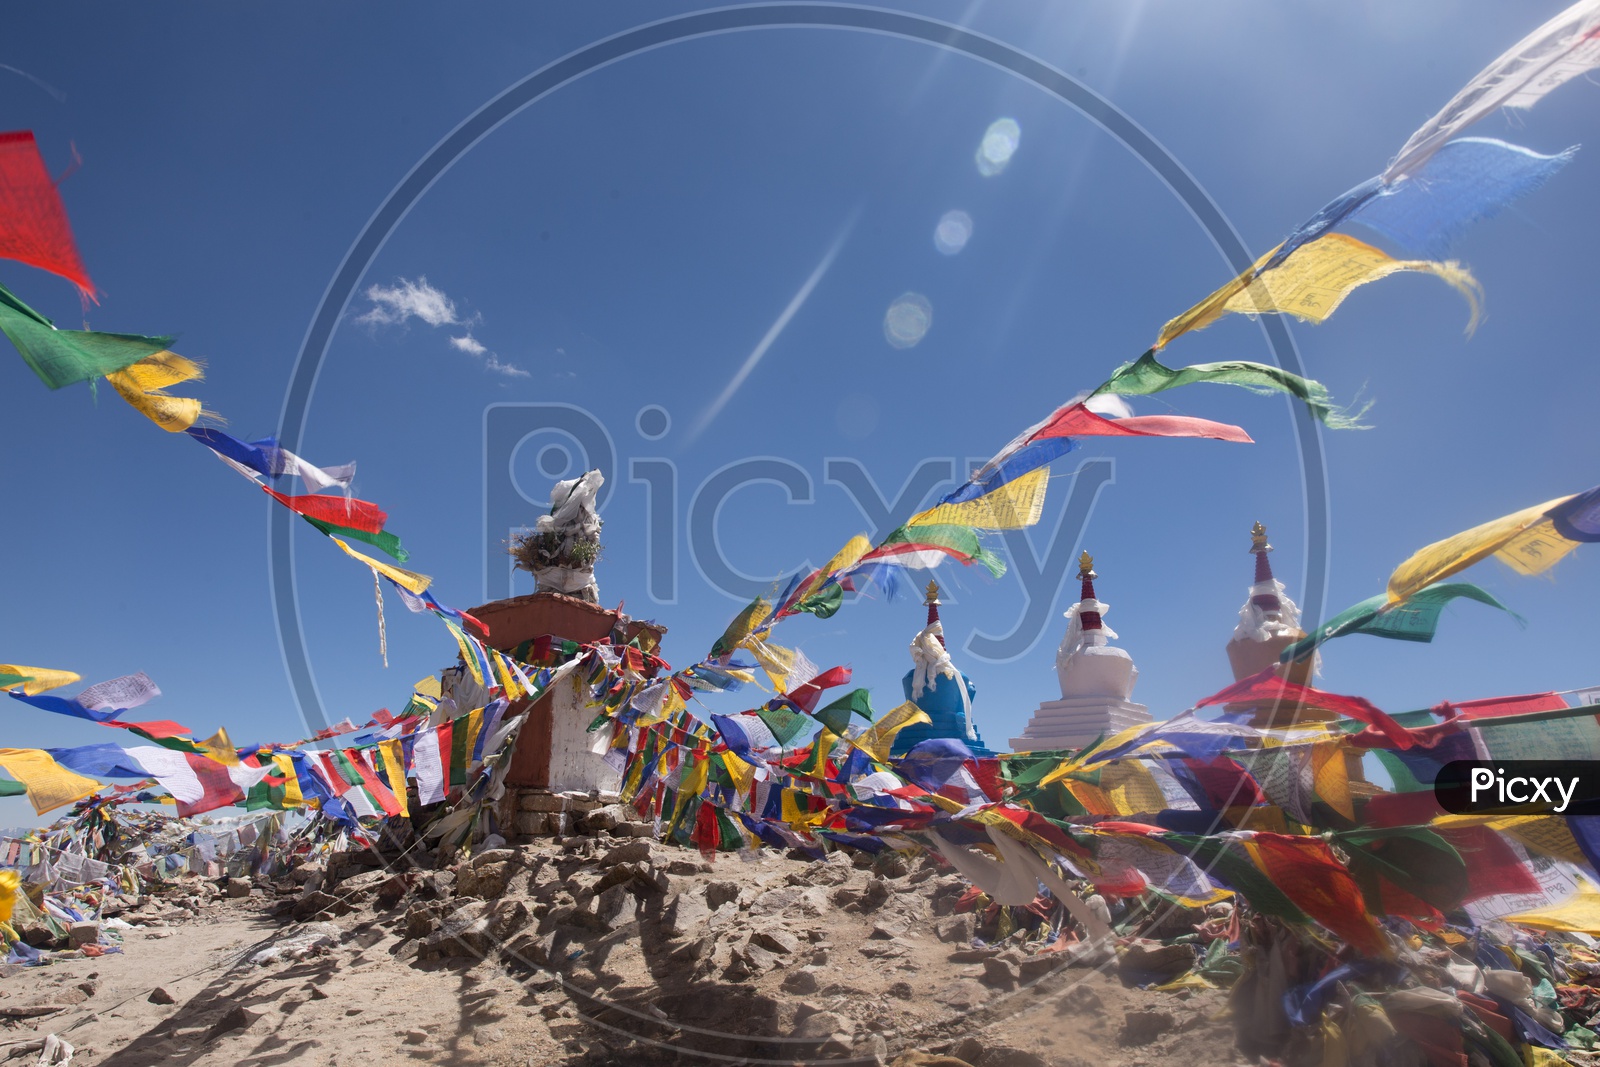 Colorful Tibetan Flags At the  Shanti Stupas  By The Buddhist Temples in the Valleys Of Leh